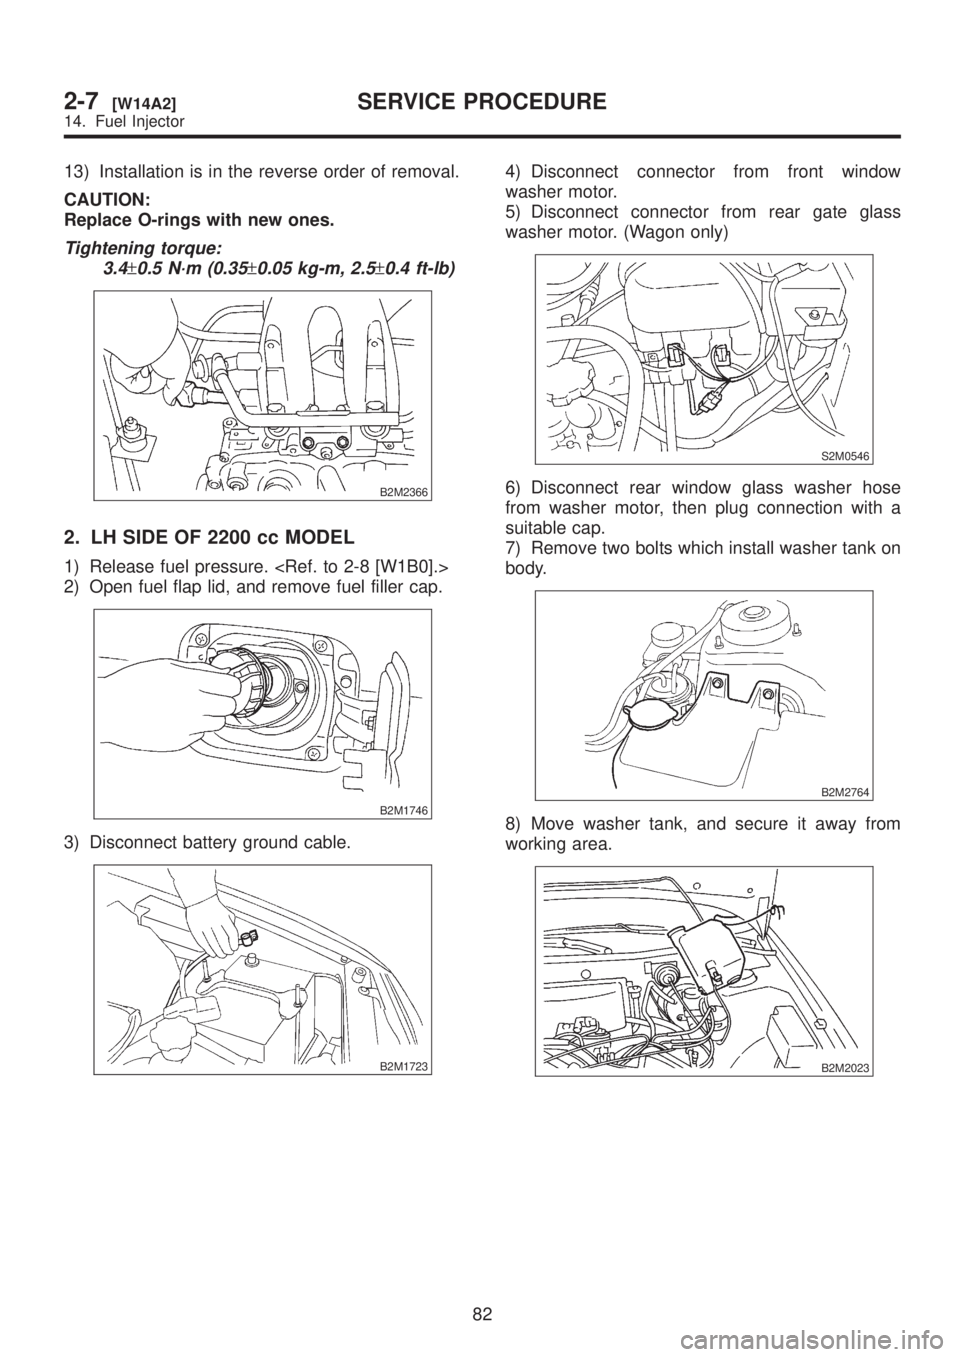 SUBARU LEGACY 1999  Service Repair Manual 13) Installation is in the reverse order of removal.
CAUTION:
Replace O-rings with new ones.
Tightening torque:
3.4
±0.5 N´m (0.35±0.05 kg-m, 2.5±0.4 ft-lb)
B2M2366
2. LH SIDE OF 2200 cc MODEL
1) 